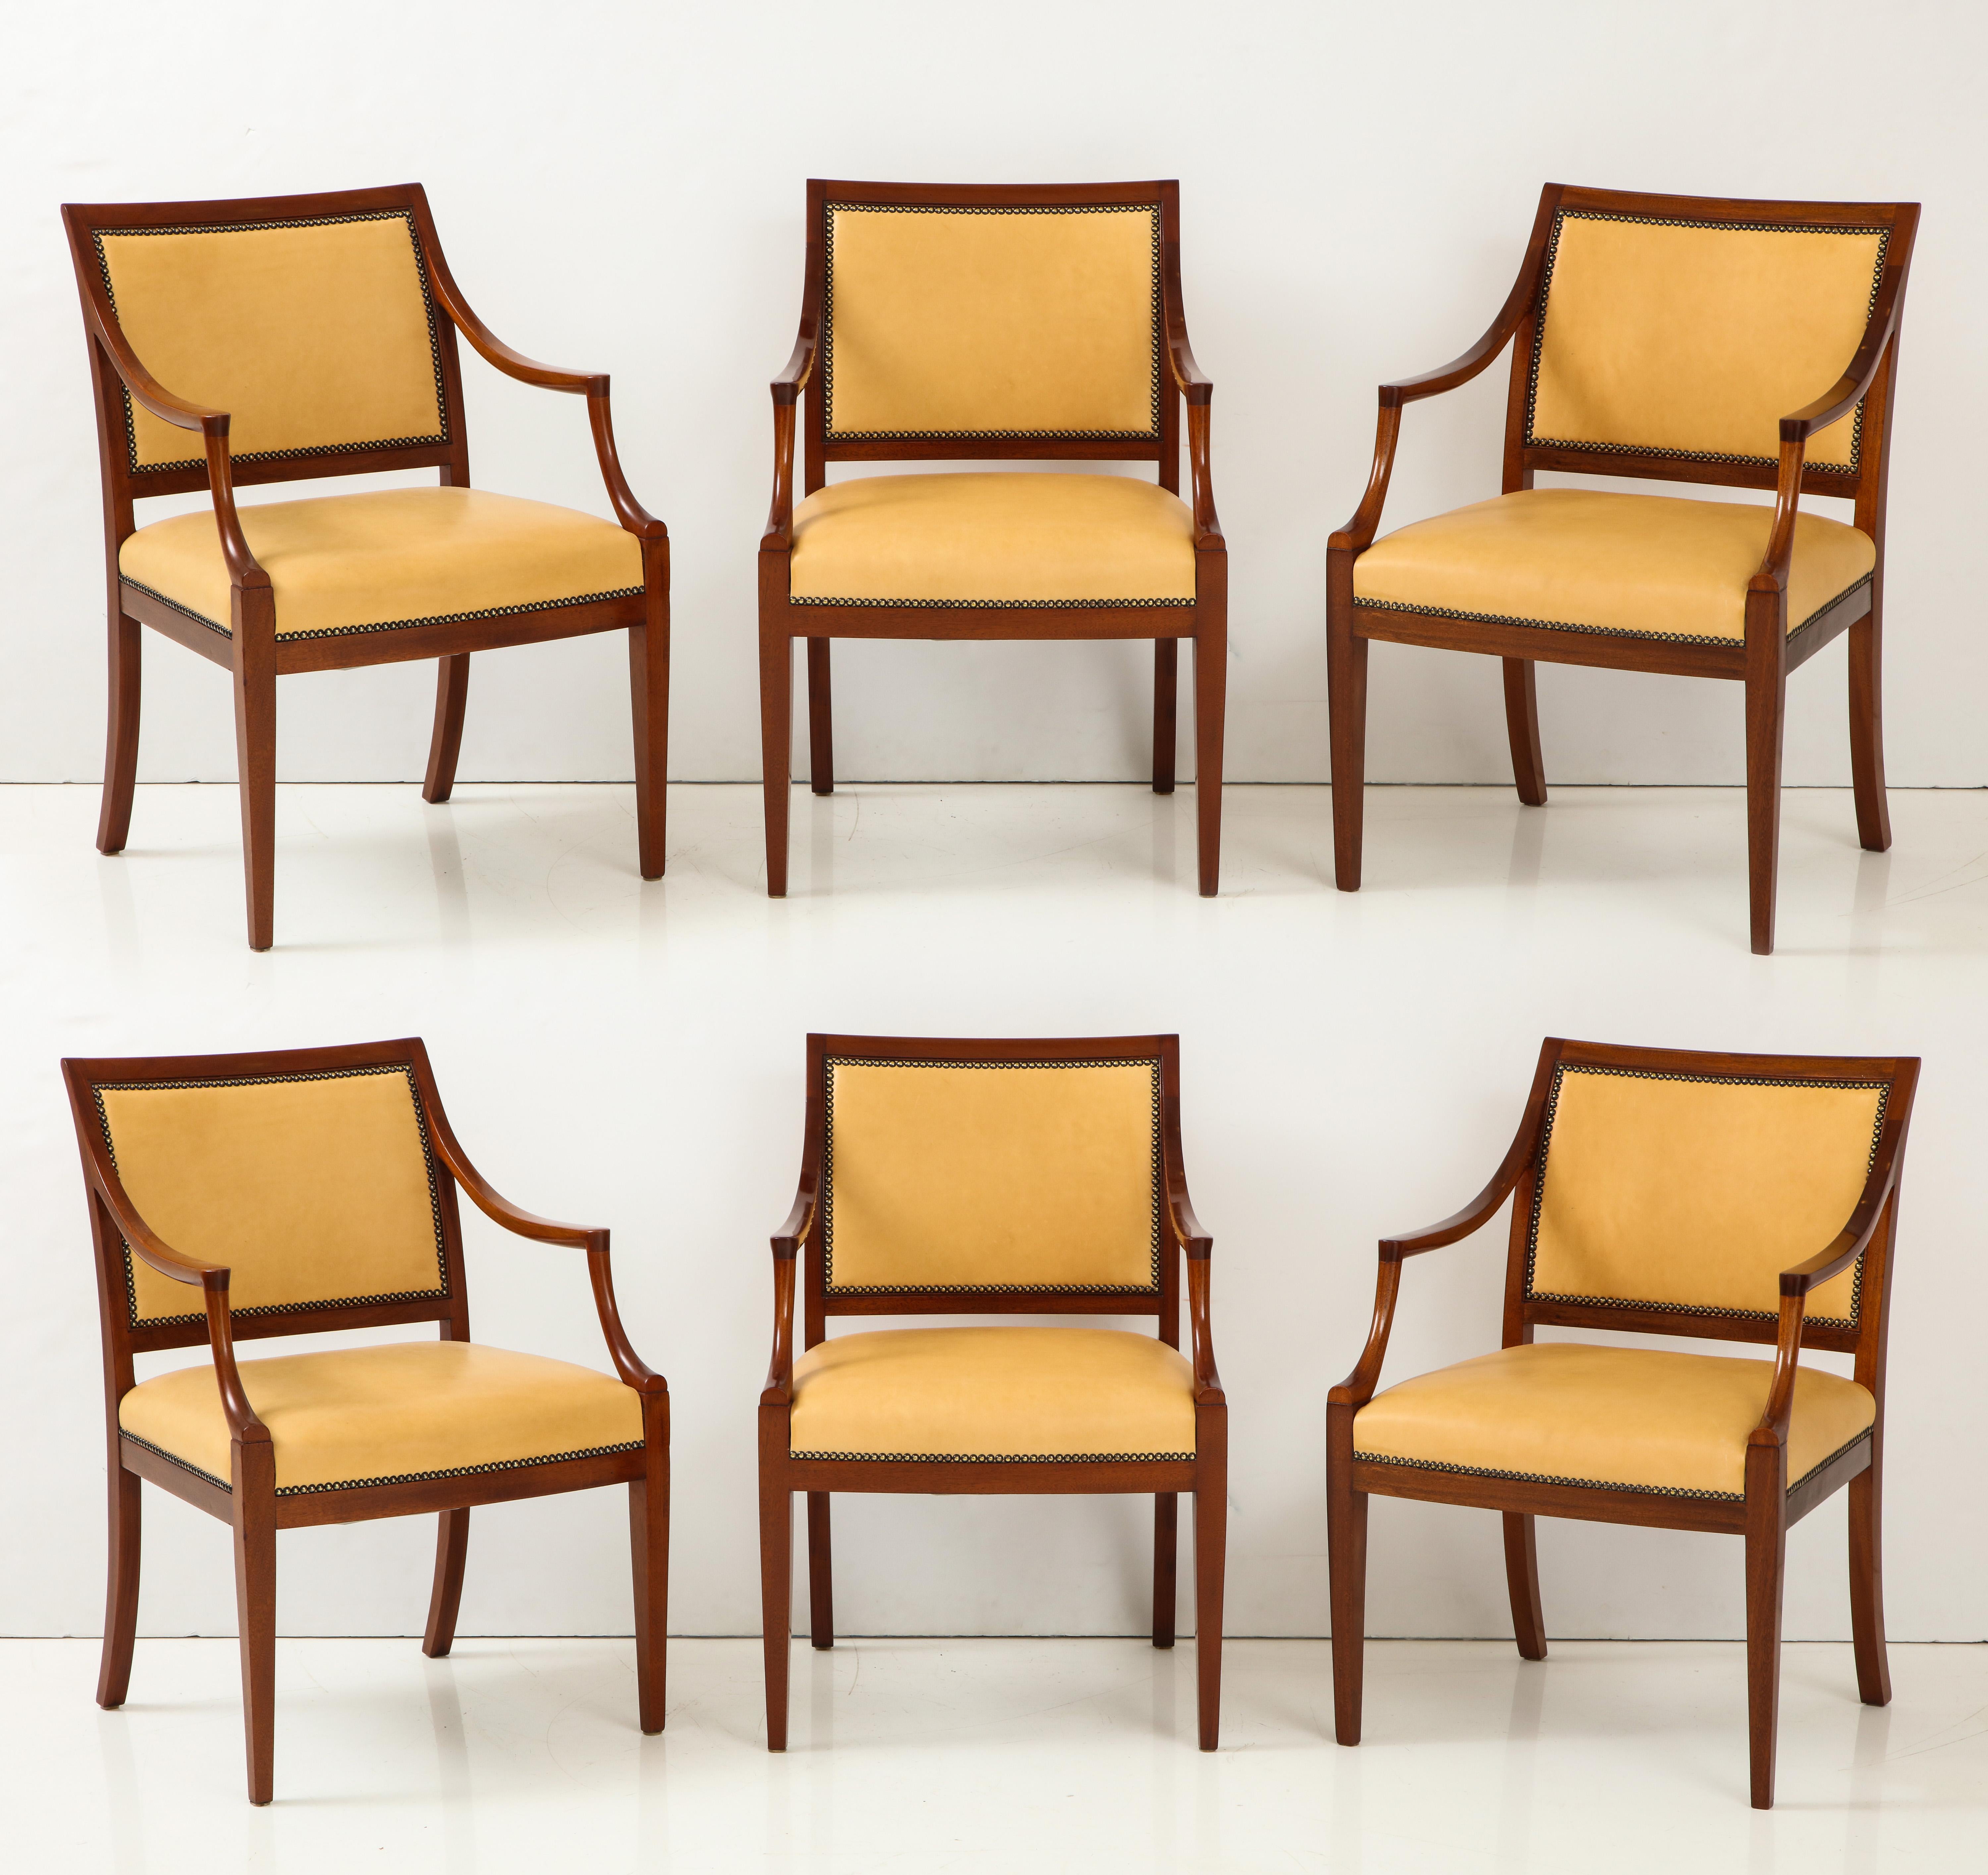 Mid-20th Century Set of Four Danish Mahogany Open Armchairs by Frits Henningsen, circa 1940s